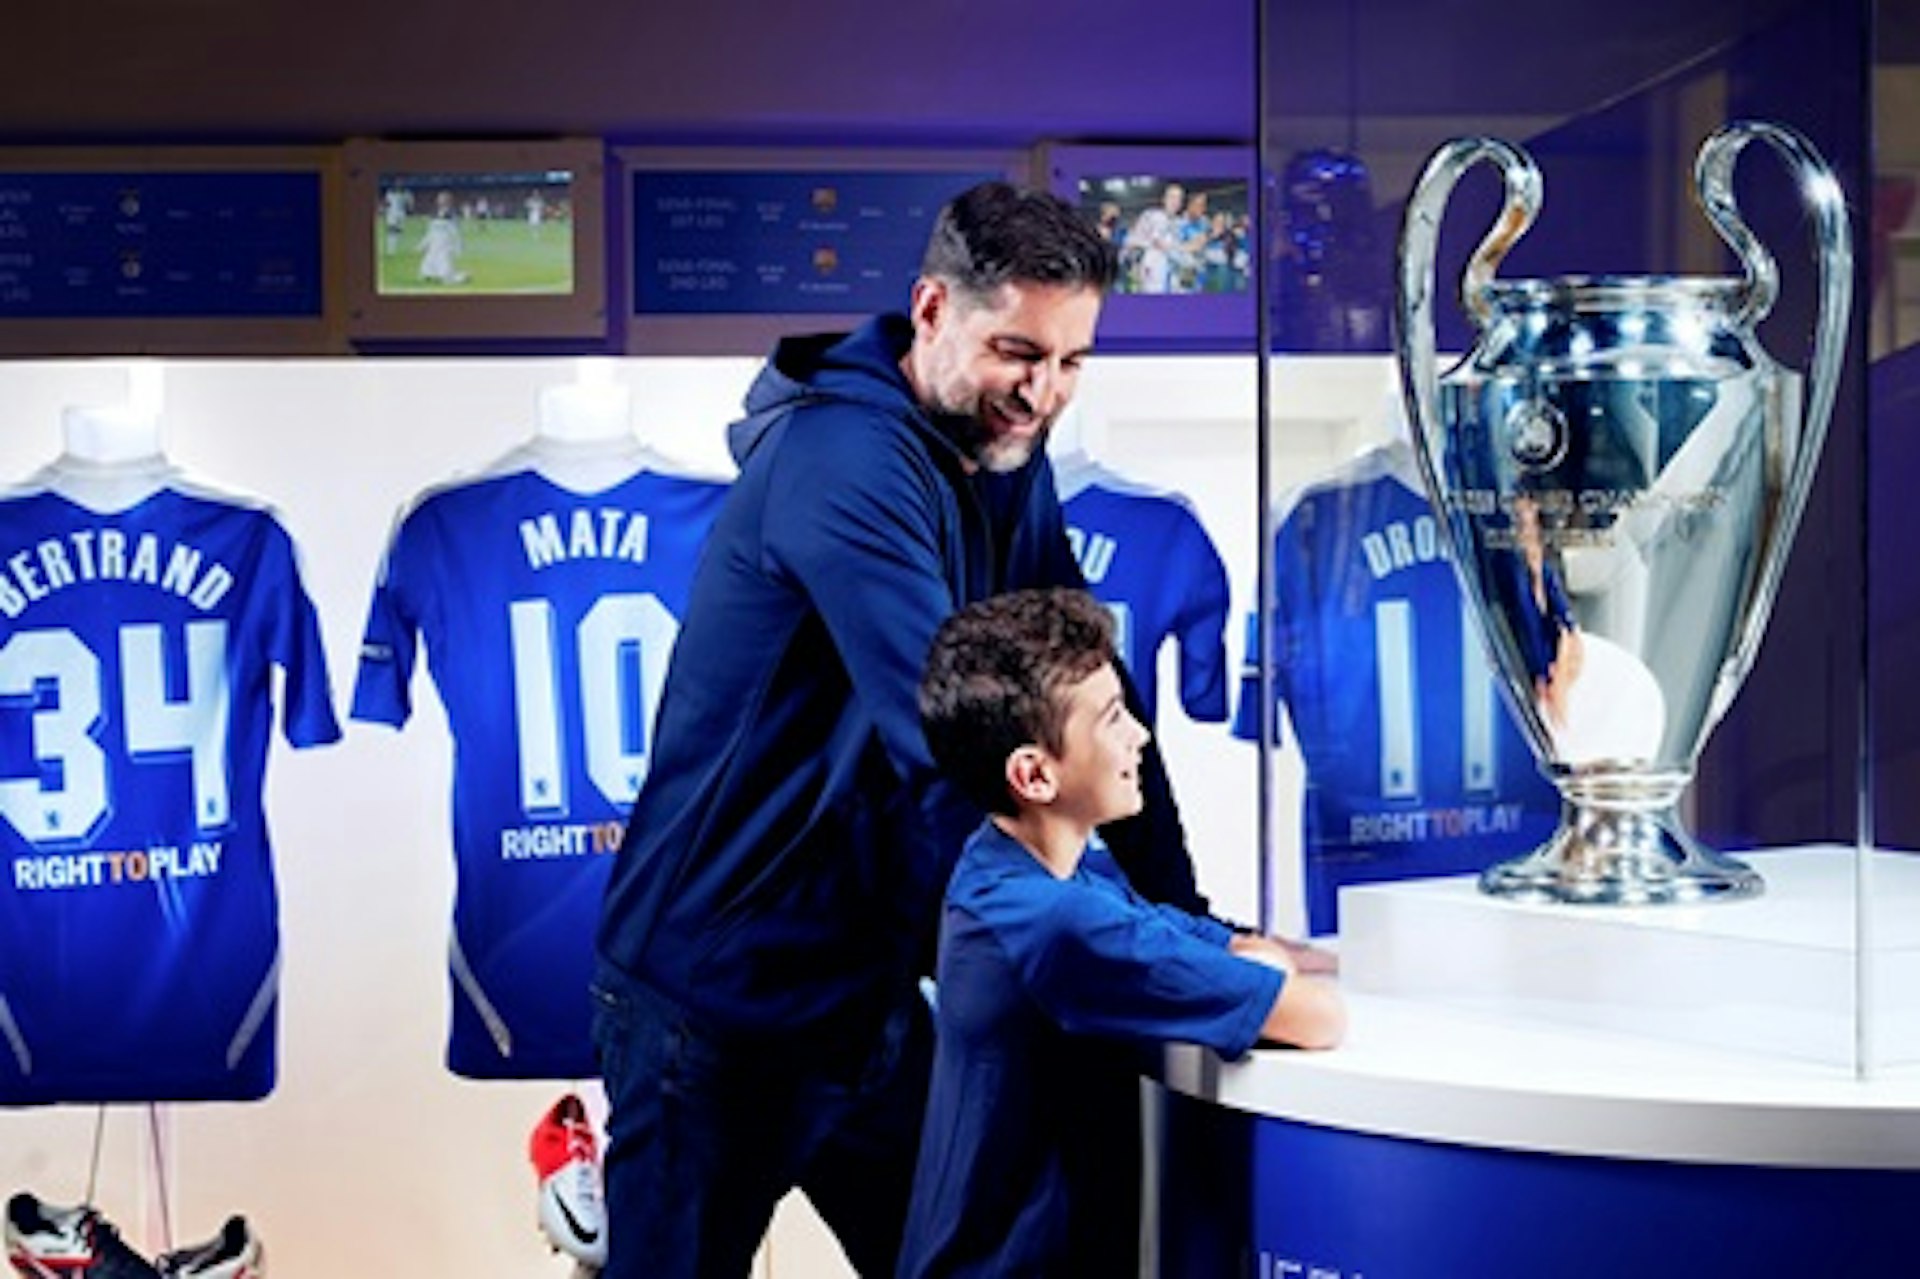 Chelsea Football Club Stadium Tour for One Adult and One Child 1